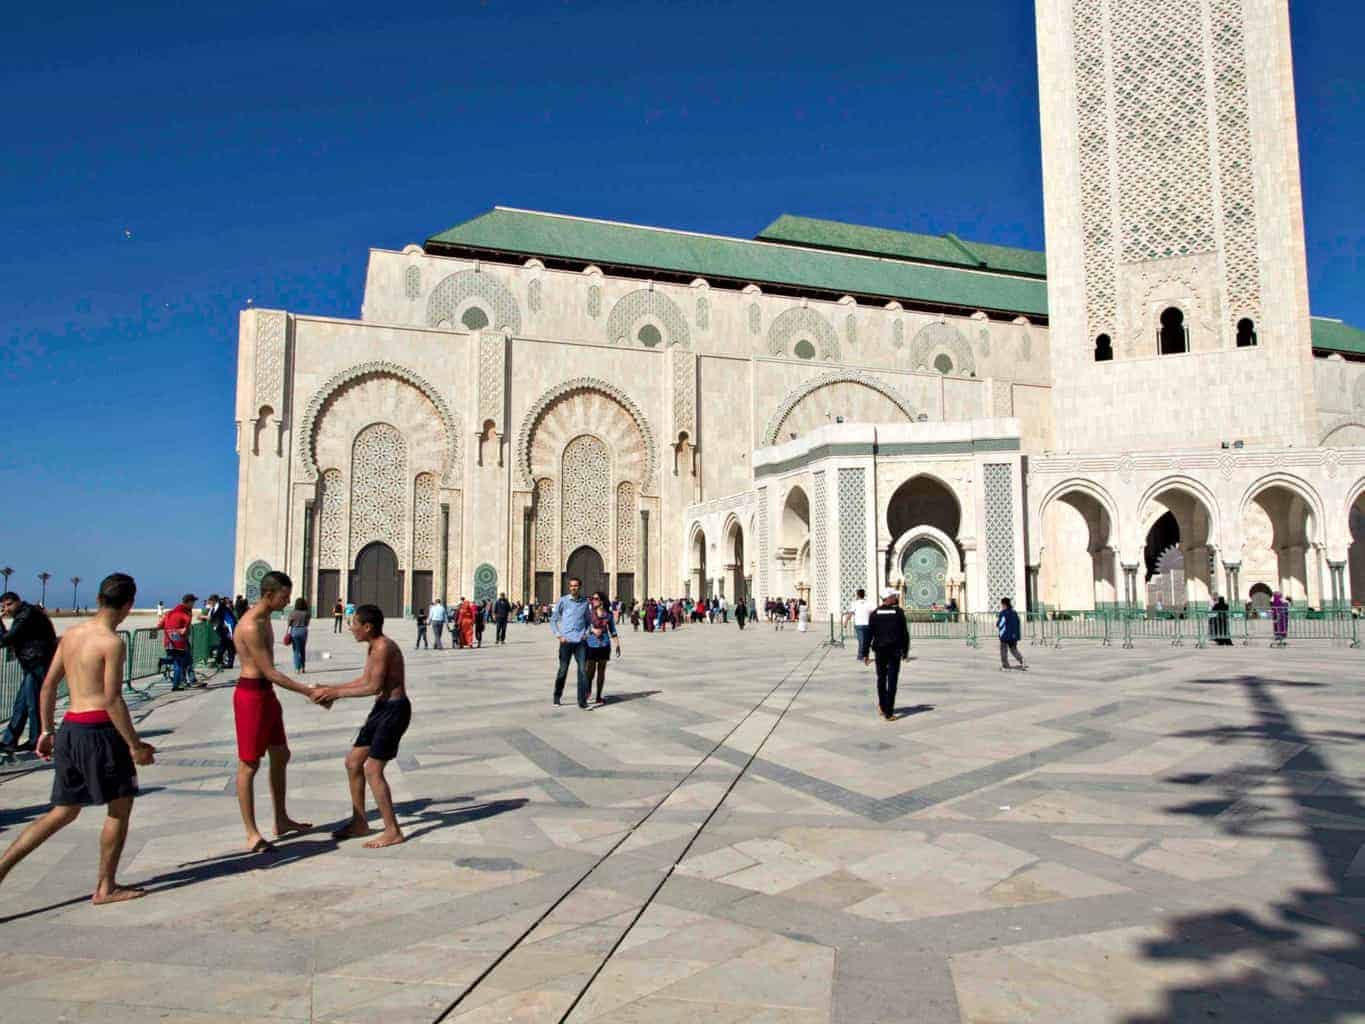 The outside of the Hassan II Mosque, with people wandering through the courtyard in front. 
